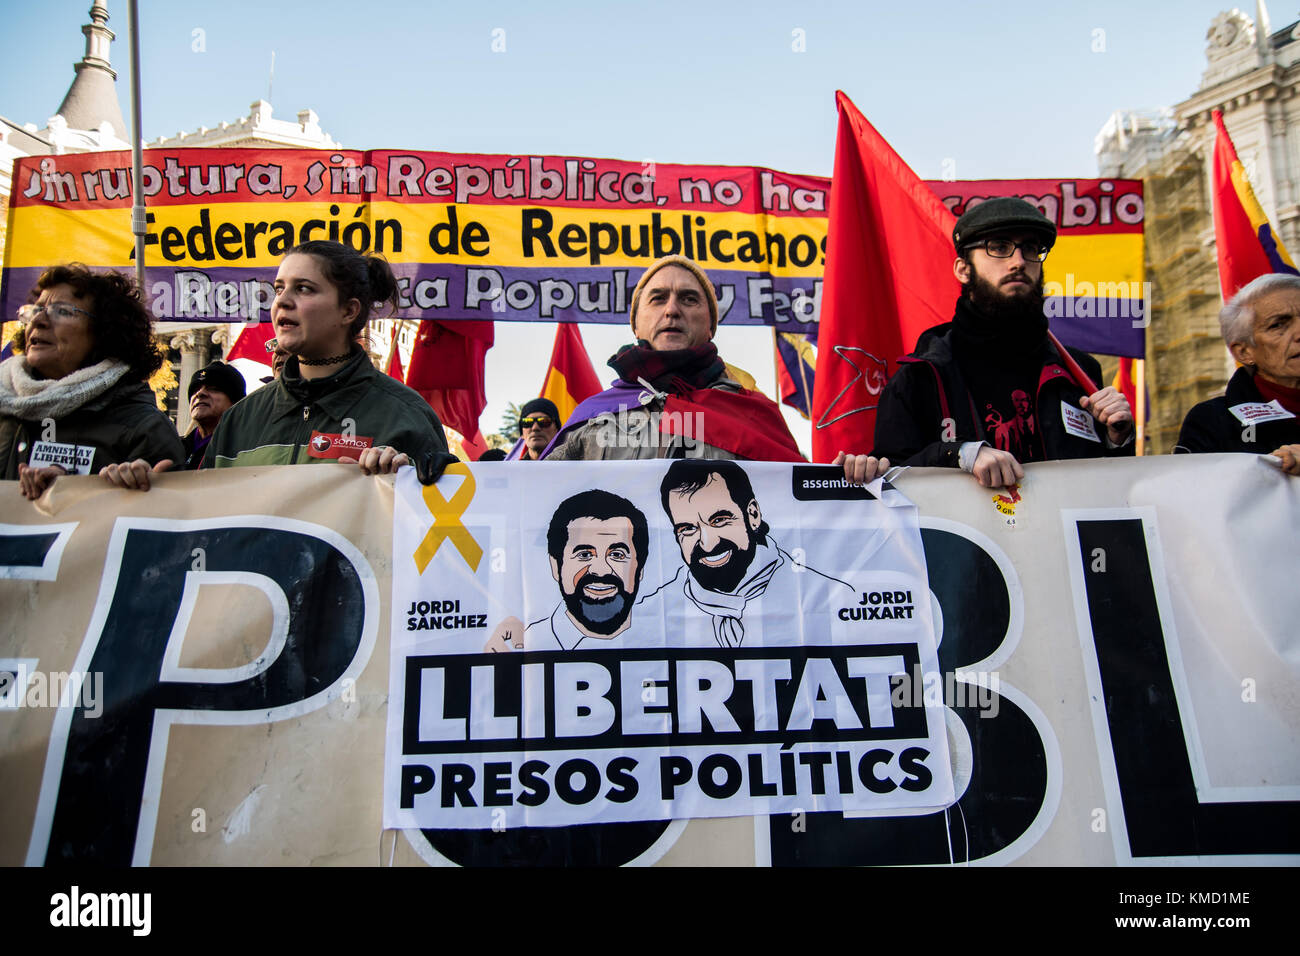 Madrid, Spain. 6th Dec, 2017. A banner demanding freedom for imprisoned Catalan leaders (known as 'Los Jordis') during a demonstration against Monarchy, demonstrators are demanding a 3rd Republic the day of the 39th anniversary of the Spanish Constitution in Madrid, Spain. Credit: Marcos del Mazo/Alamy Live News Stock Photo